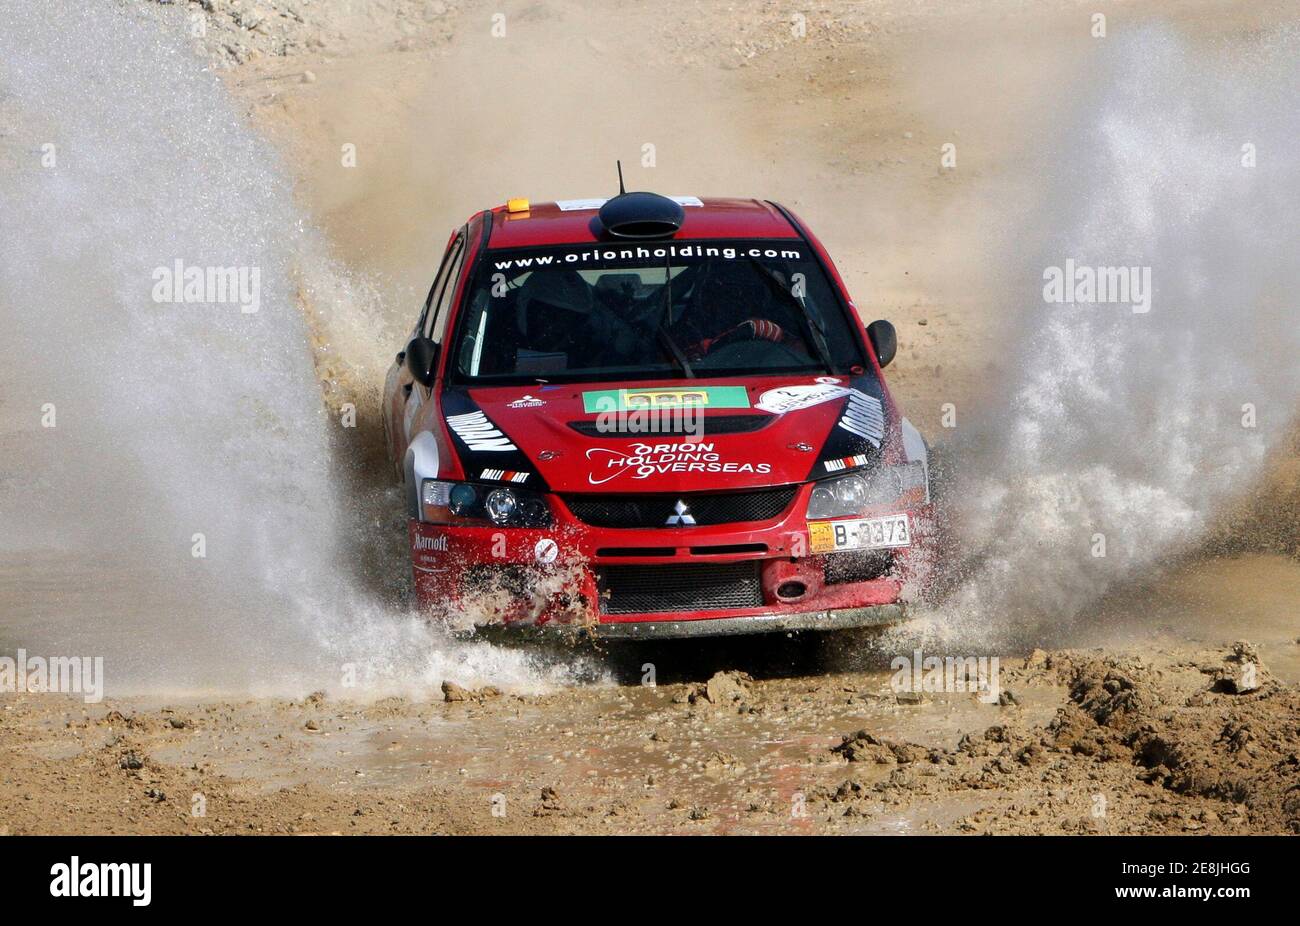 Jordanian Amjed Farrah and his Italian co-driver Nicole Arena drive their  Mistubishi Lancer Evo 9 at the first stage of the Jordan Rally 2008-Middle  East Rally Championship at the Jordanian side of